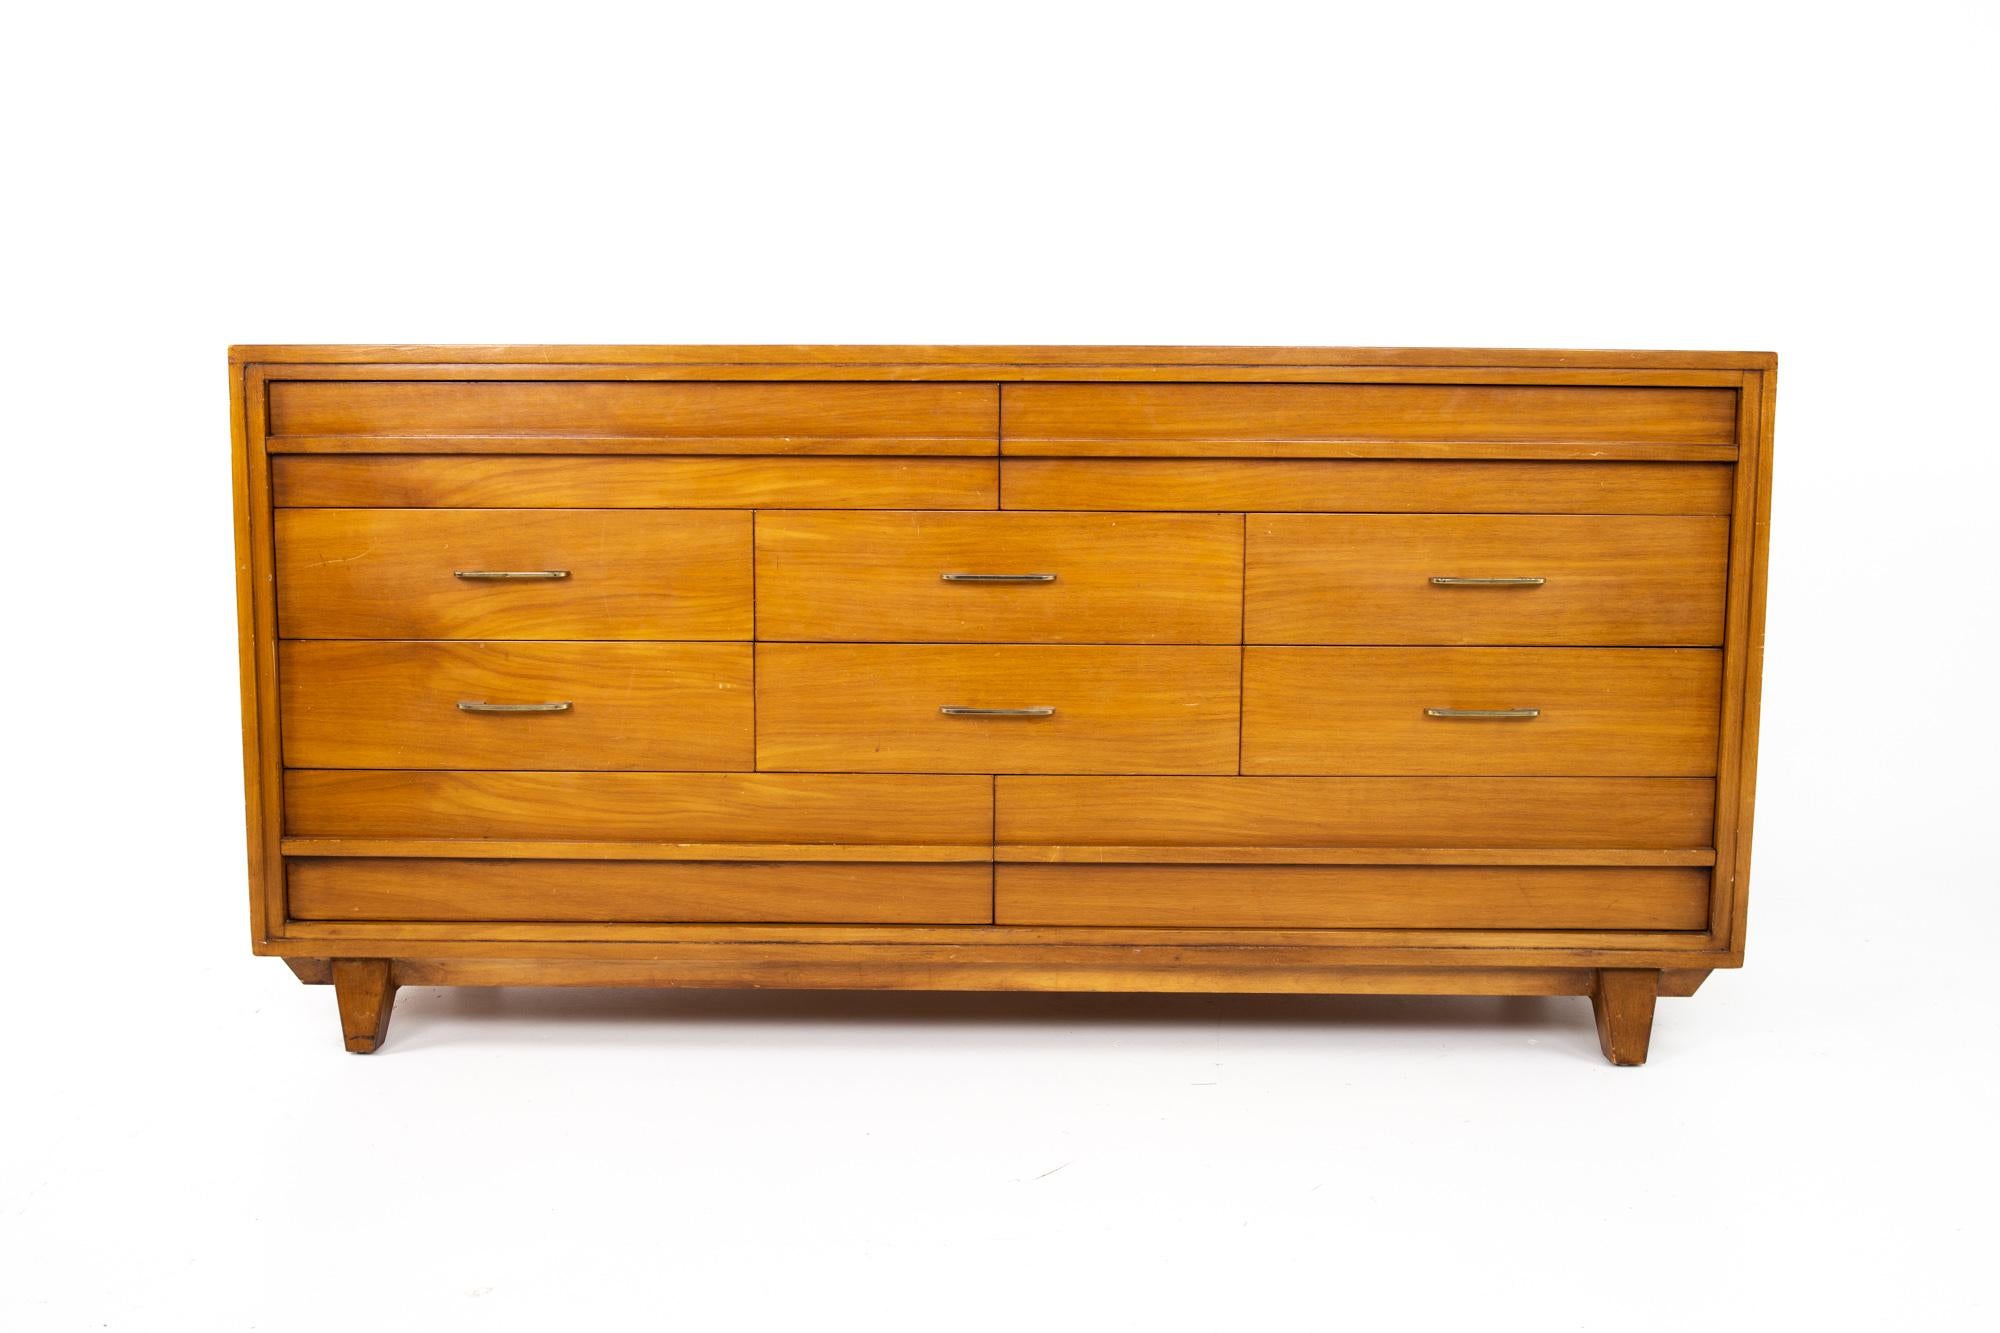 RWAY Mid Century honey walnut and brass 10-drawer lowboy dresser
Dresser measures: 69 wide x 21.5 deep x 33.5 inches high 

This price includes getting this piece in what we call restored vintage condition. That means the piece is permanently fixed